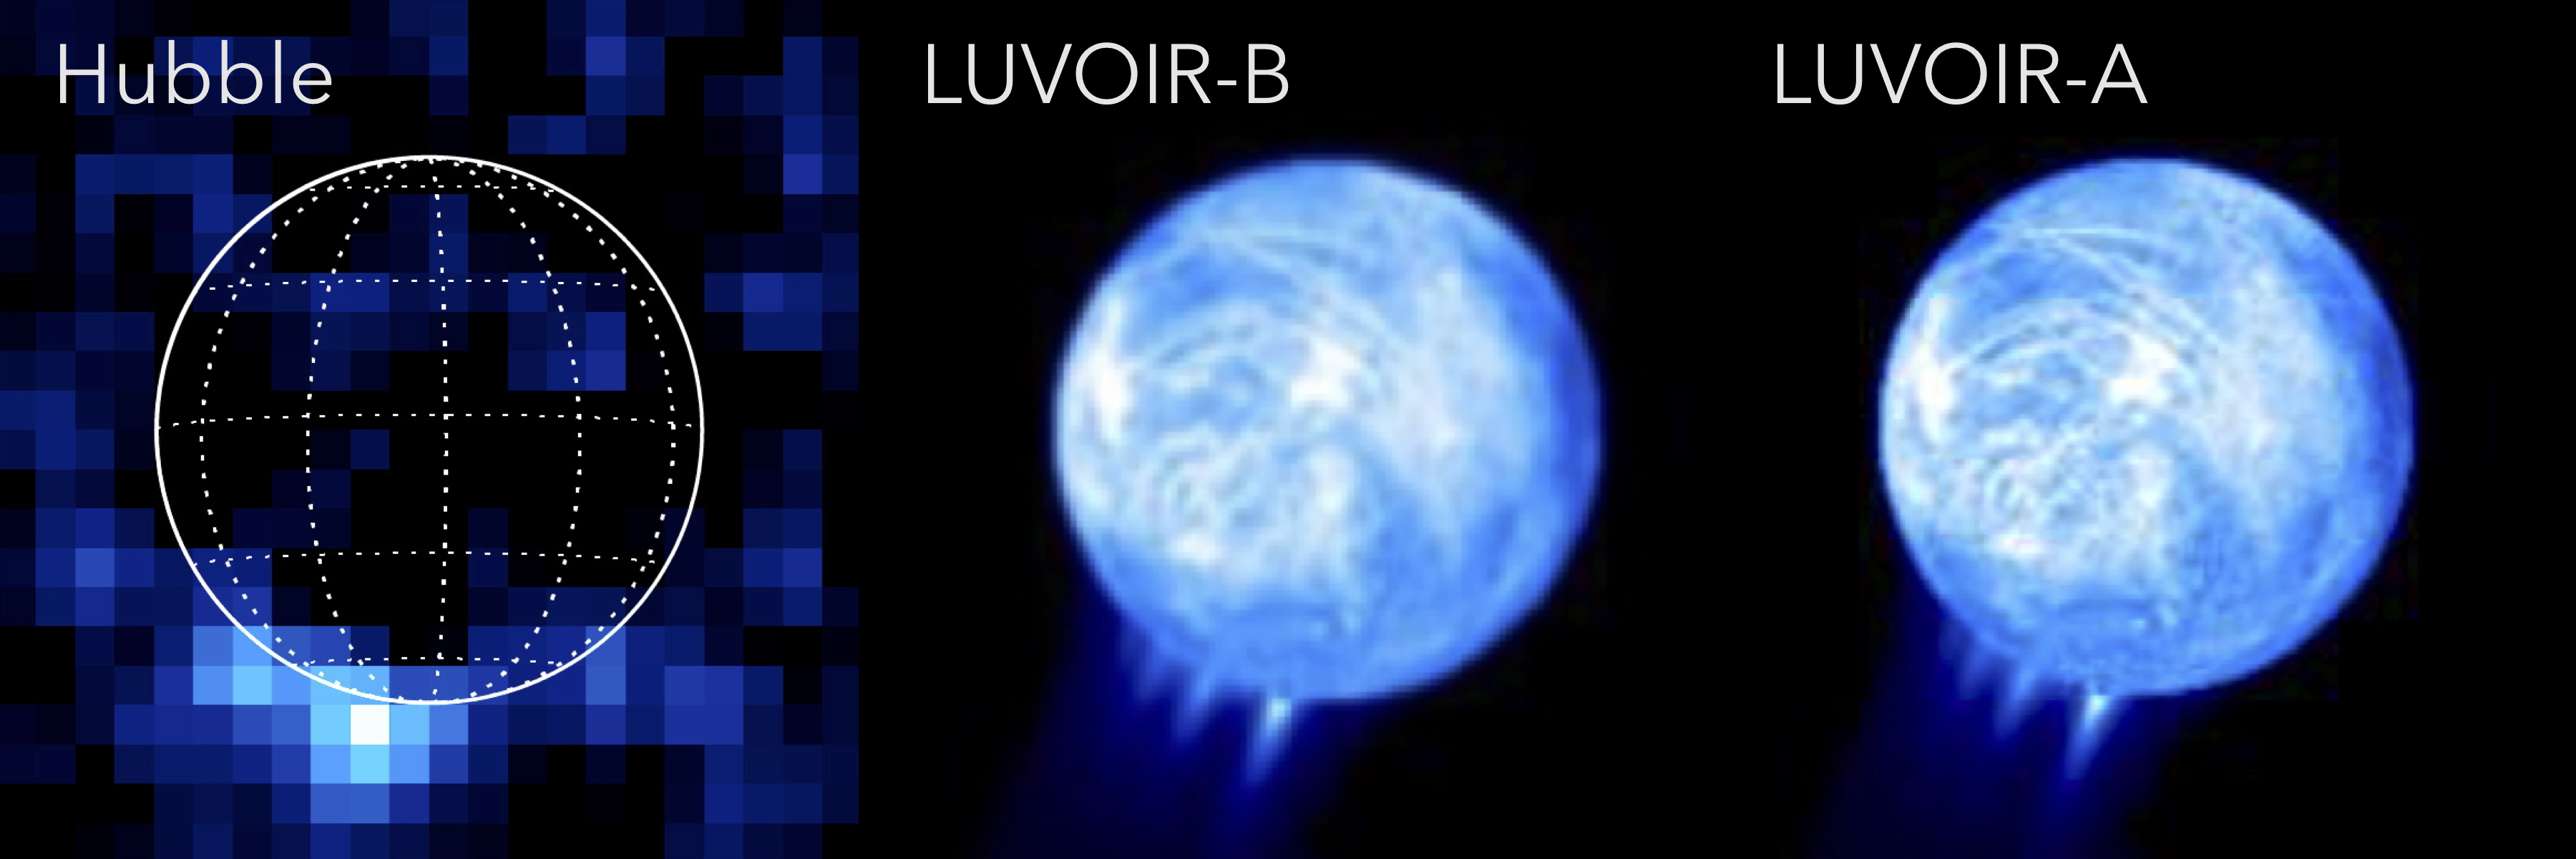 UV image of Europa with Hubble and simulated UV images of Europa with LUVOIR.